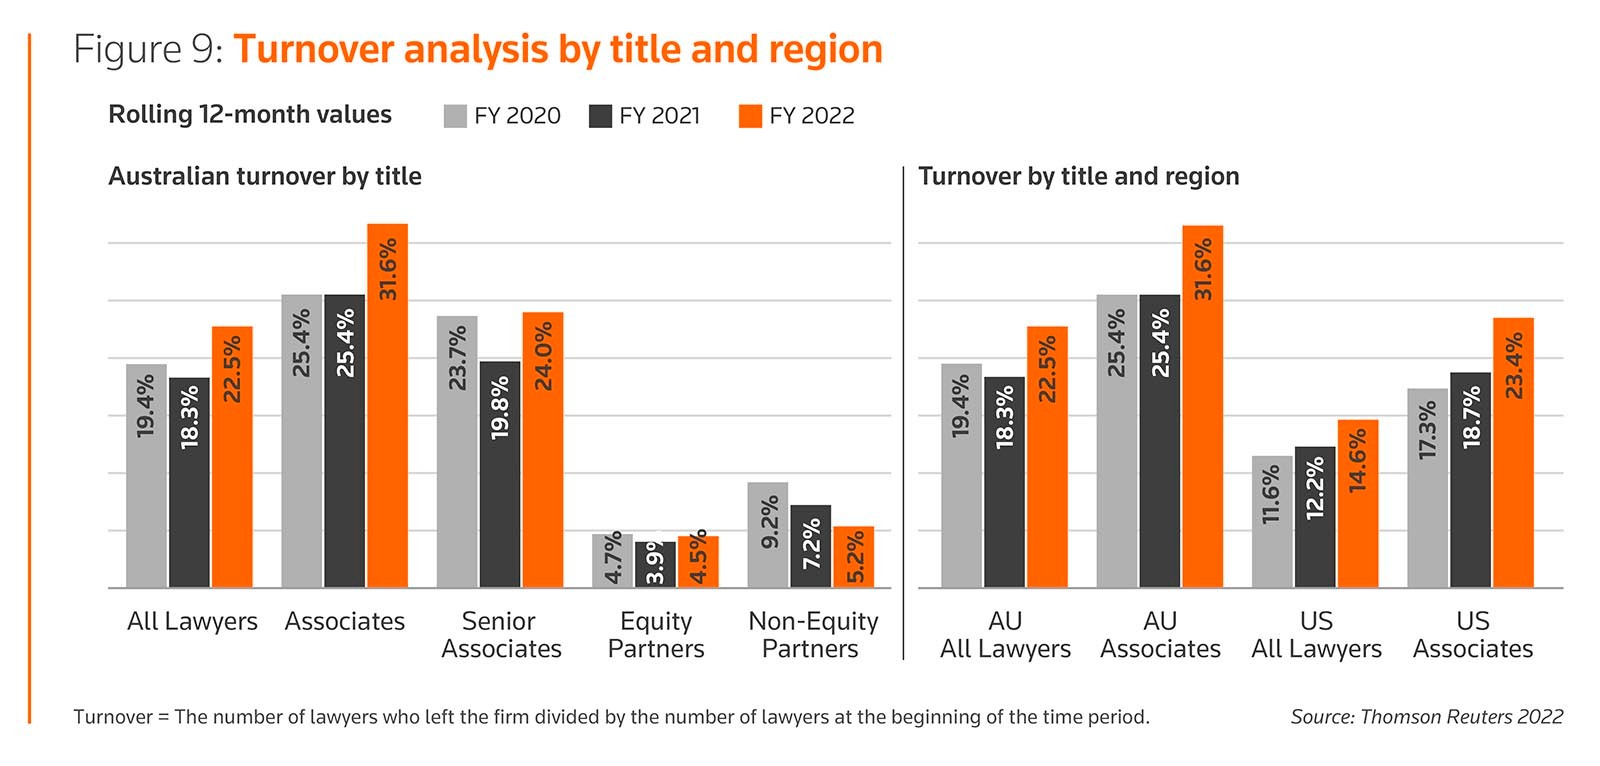 Turnover analysis by title and region